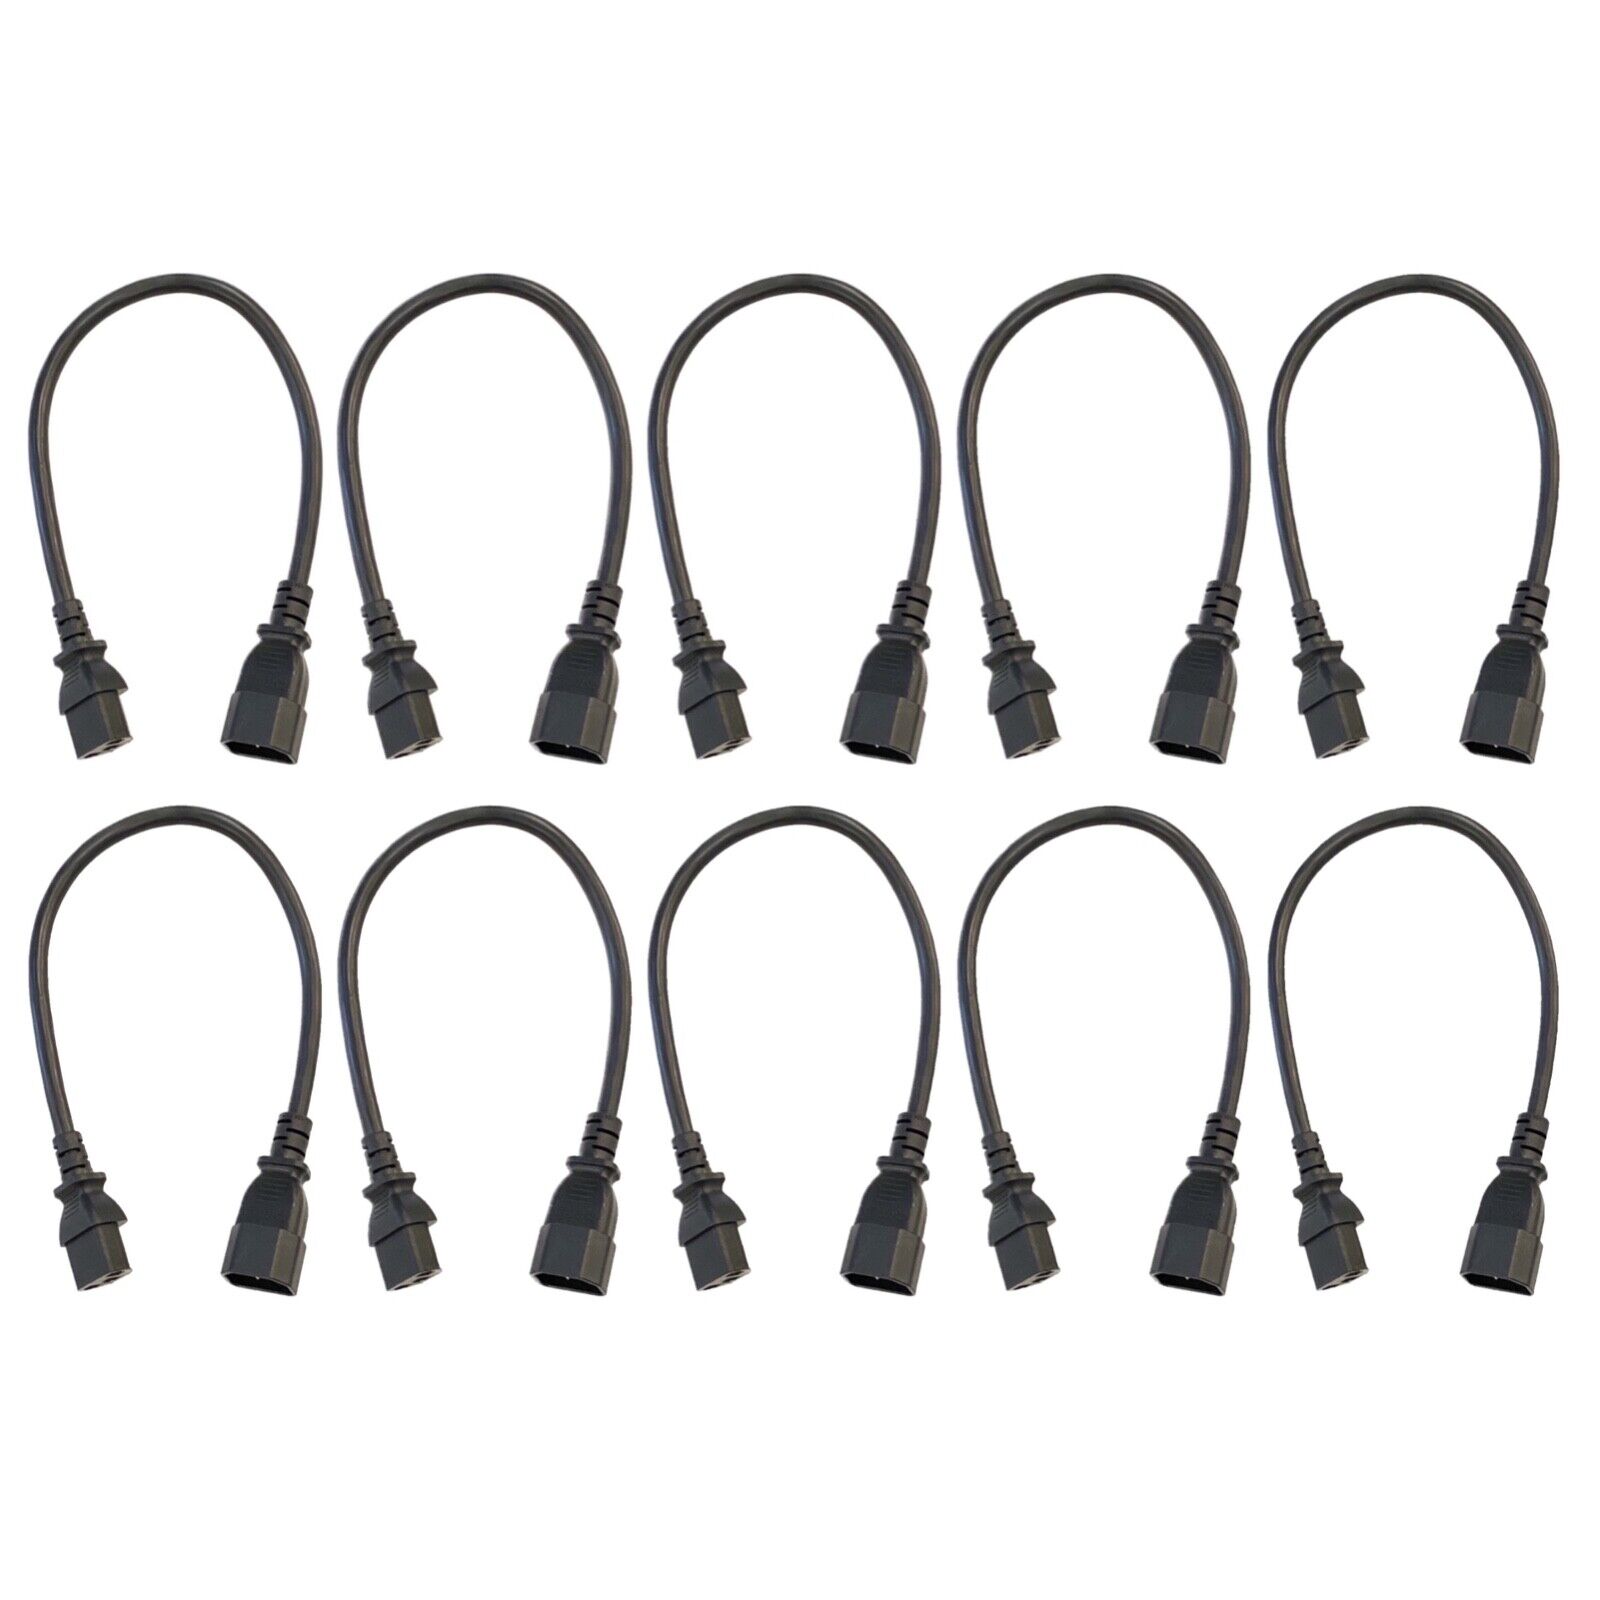 (10) Pack of C13 to C14 AC Power Cord 1.5' Foot Short 16AWG Cable